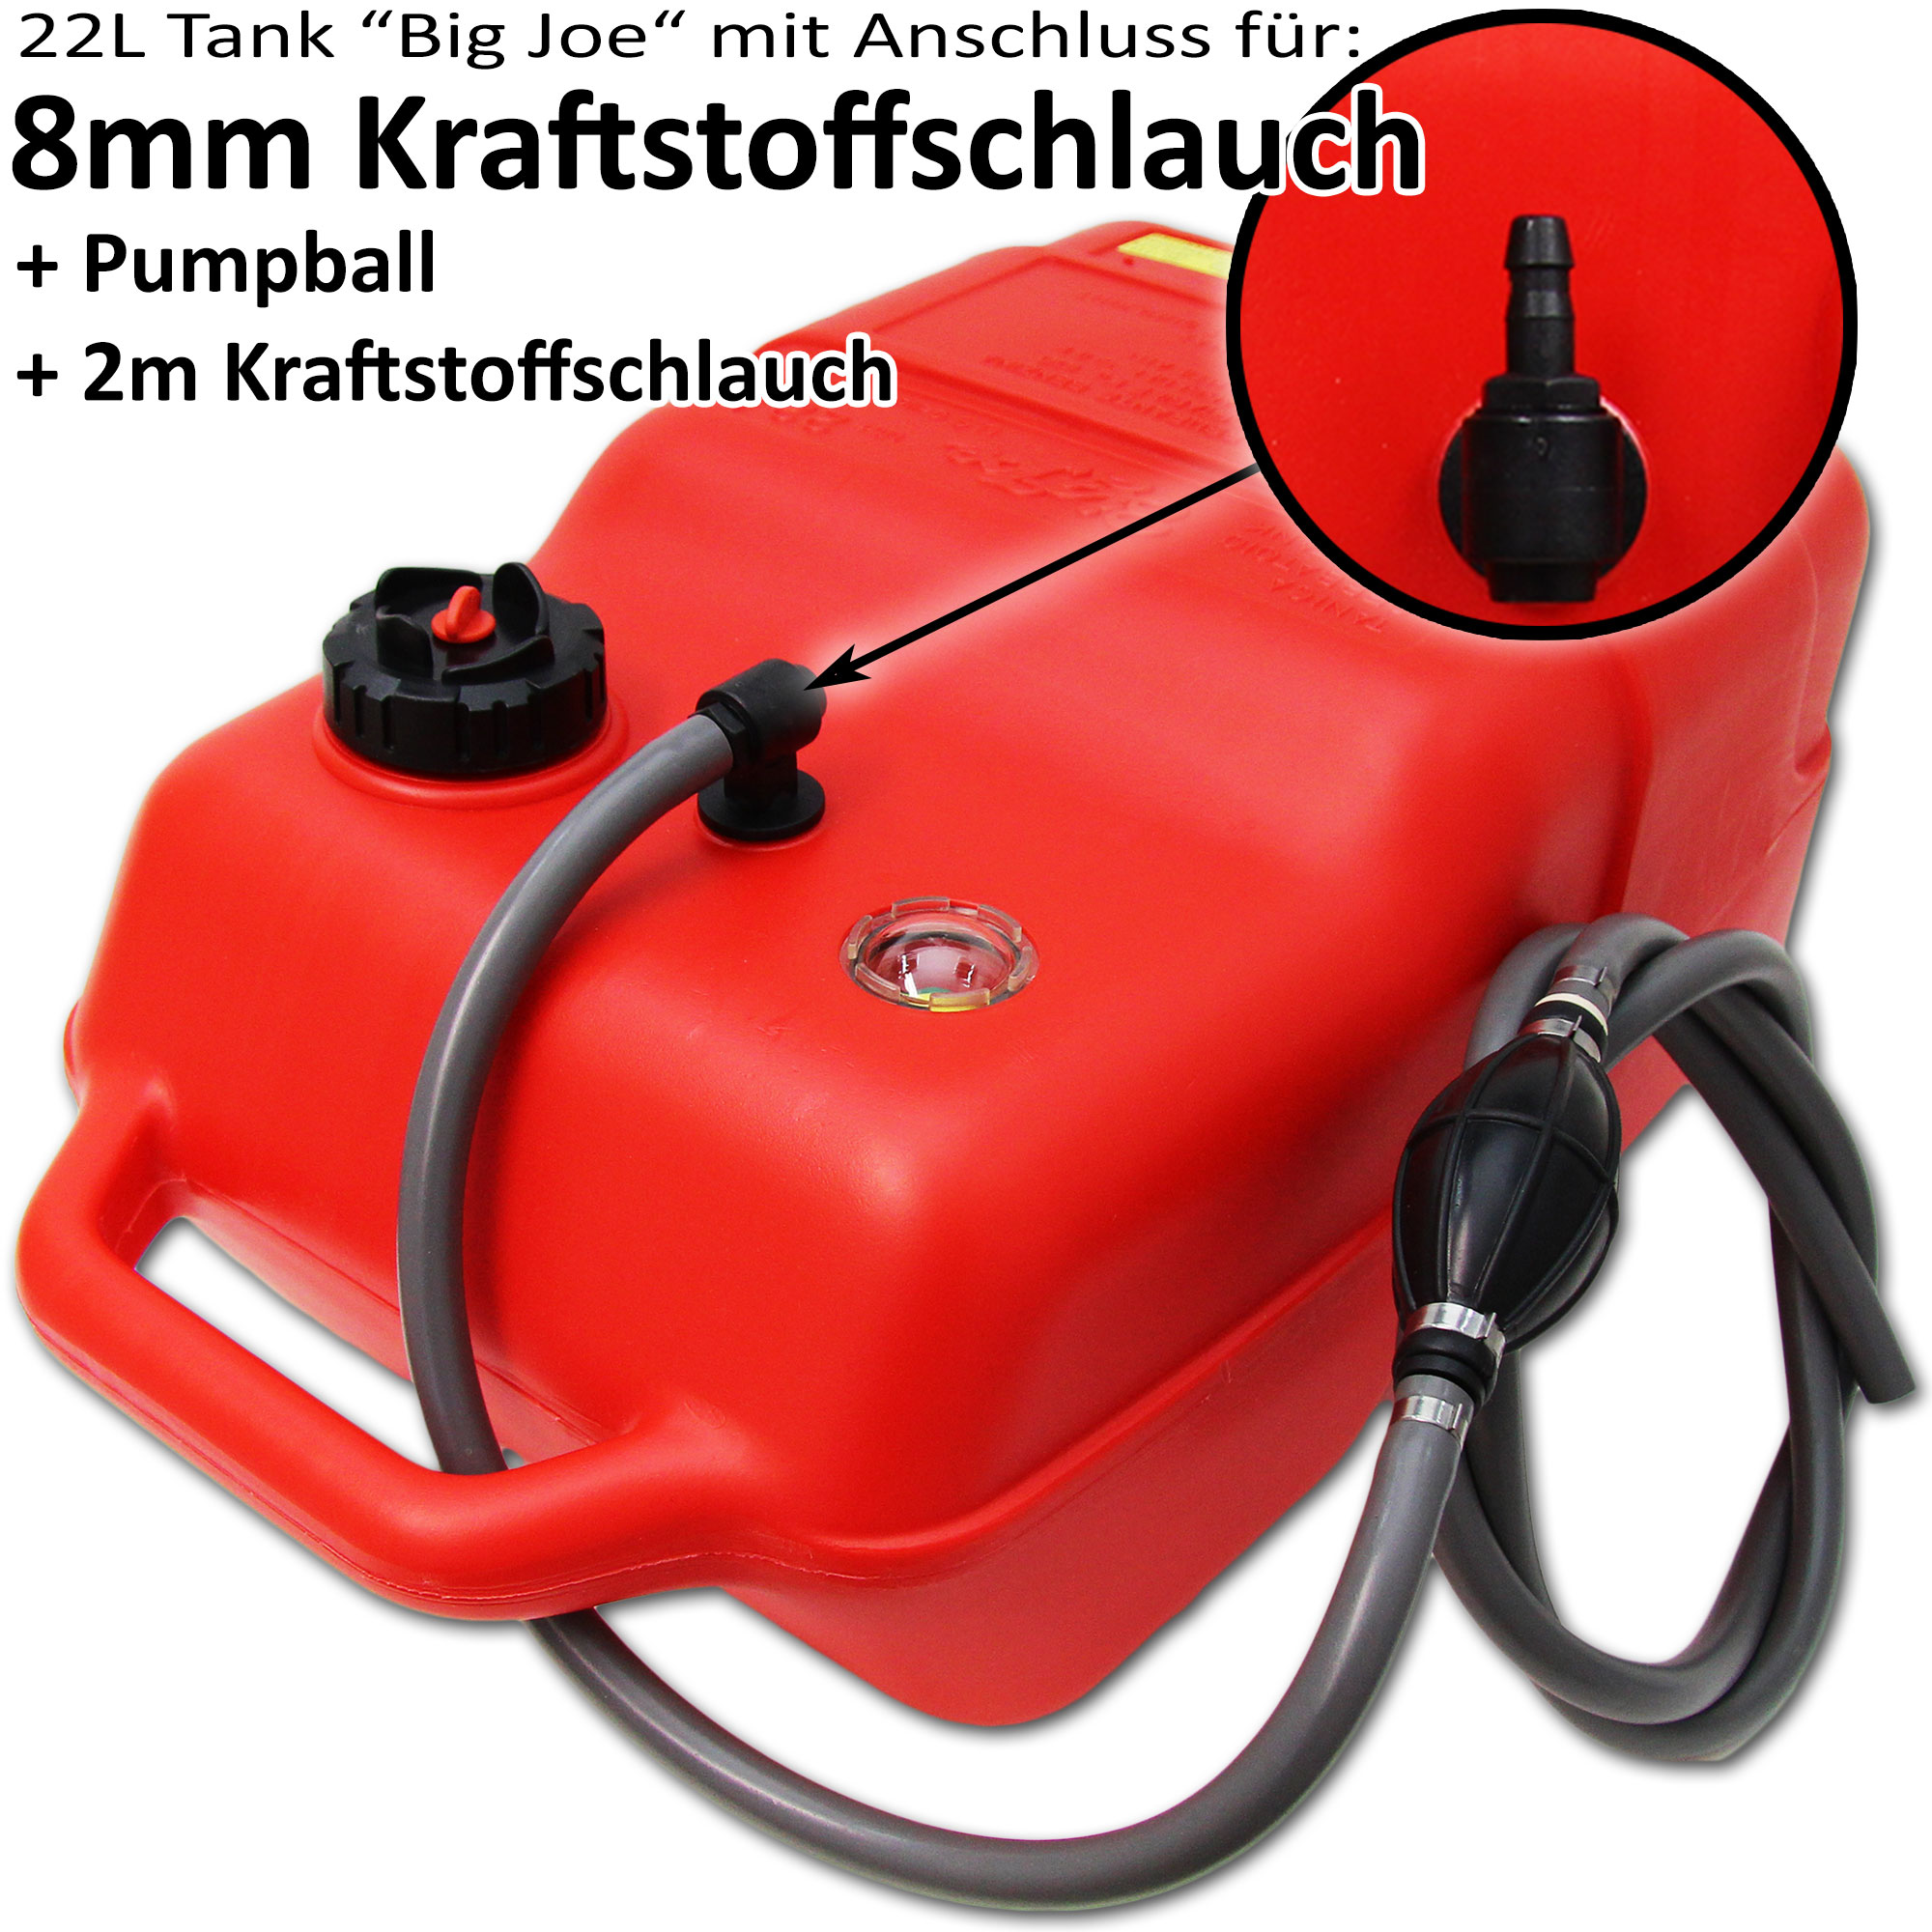 Fuel tank red / Connection nipple (8mm) / 2m hose / level indicator manual